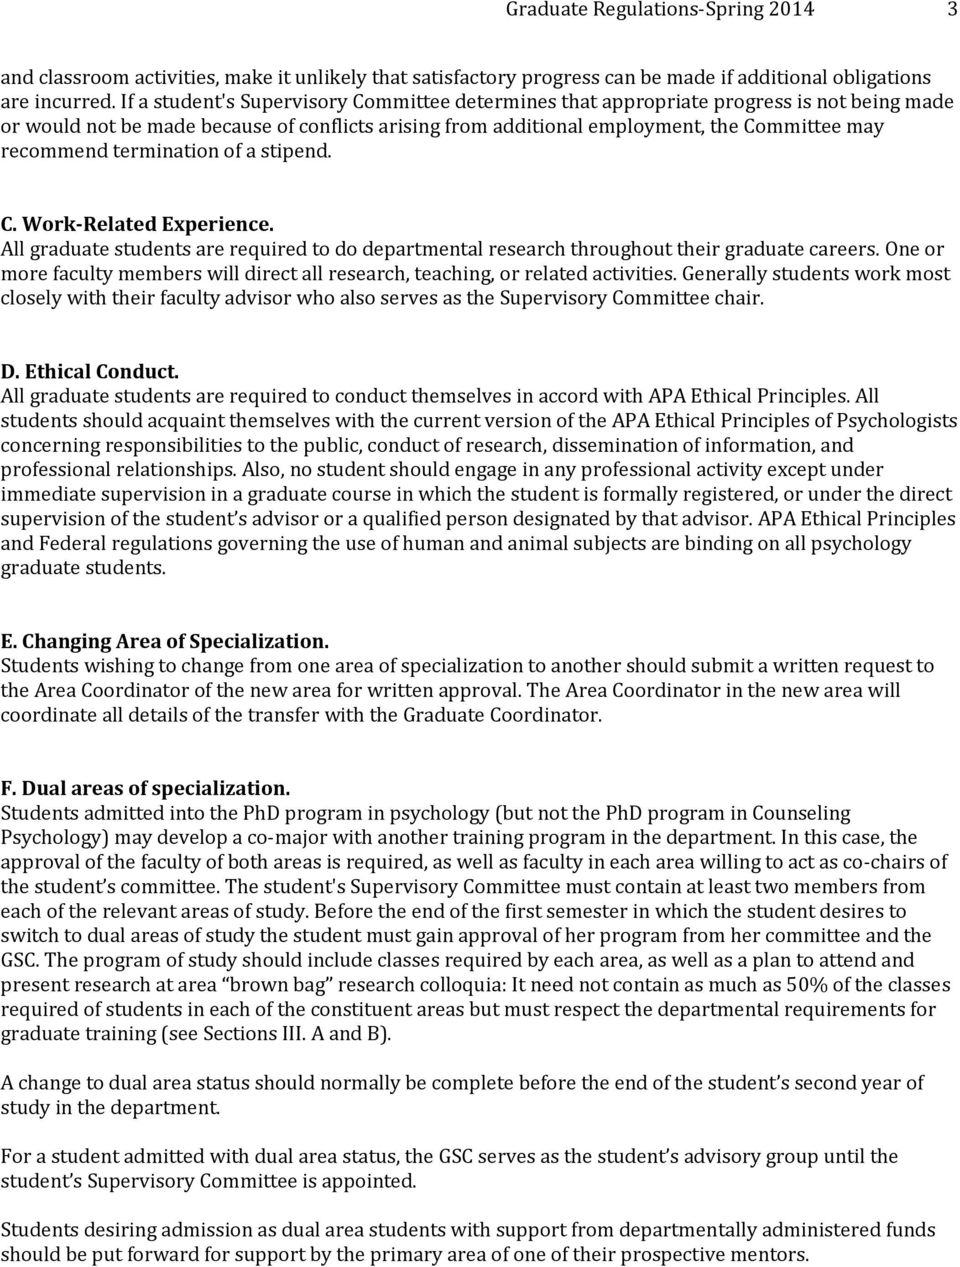 termination of a stipend. C. Work Related Experience. All graduate students are required to do departmental research throughout their graduate careers.